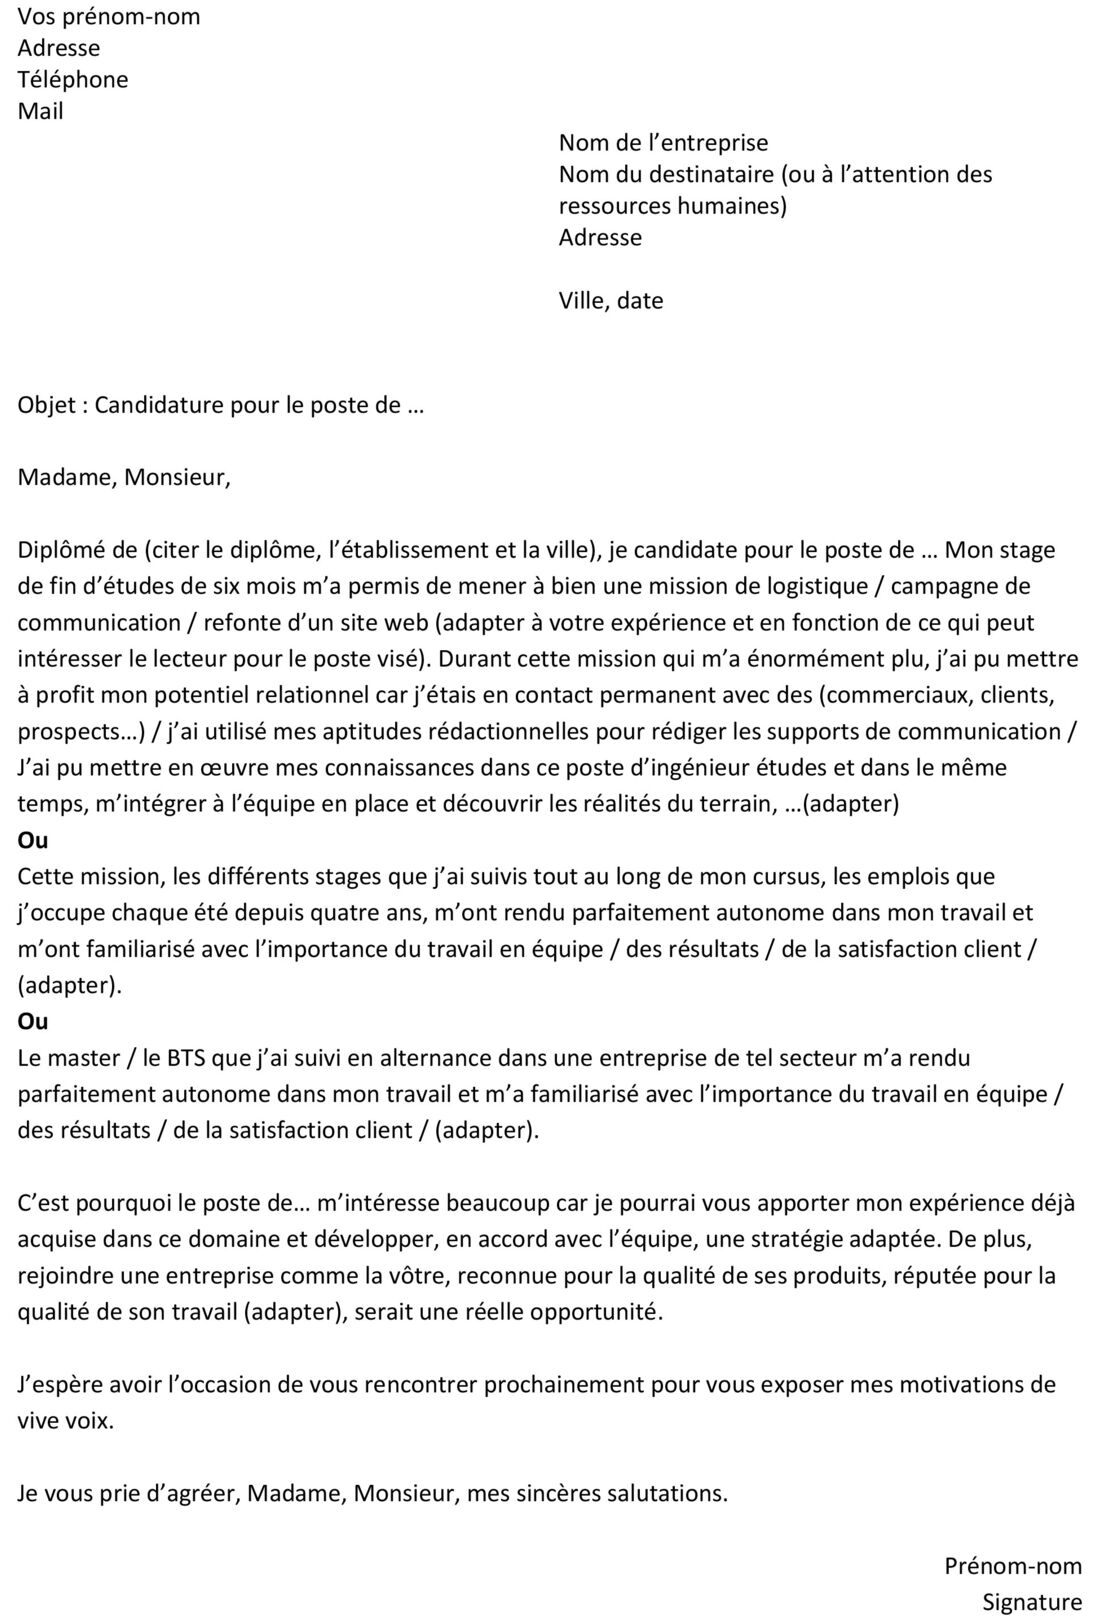 exemple de business email   32